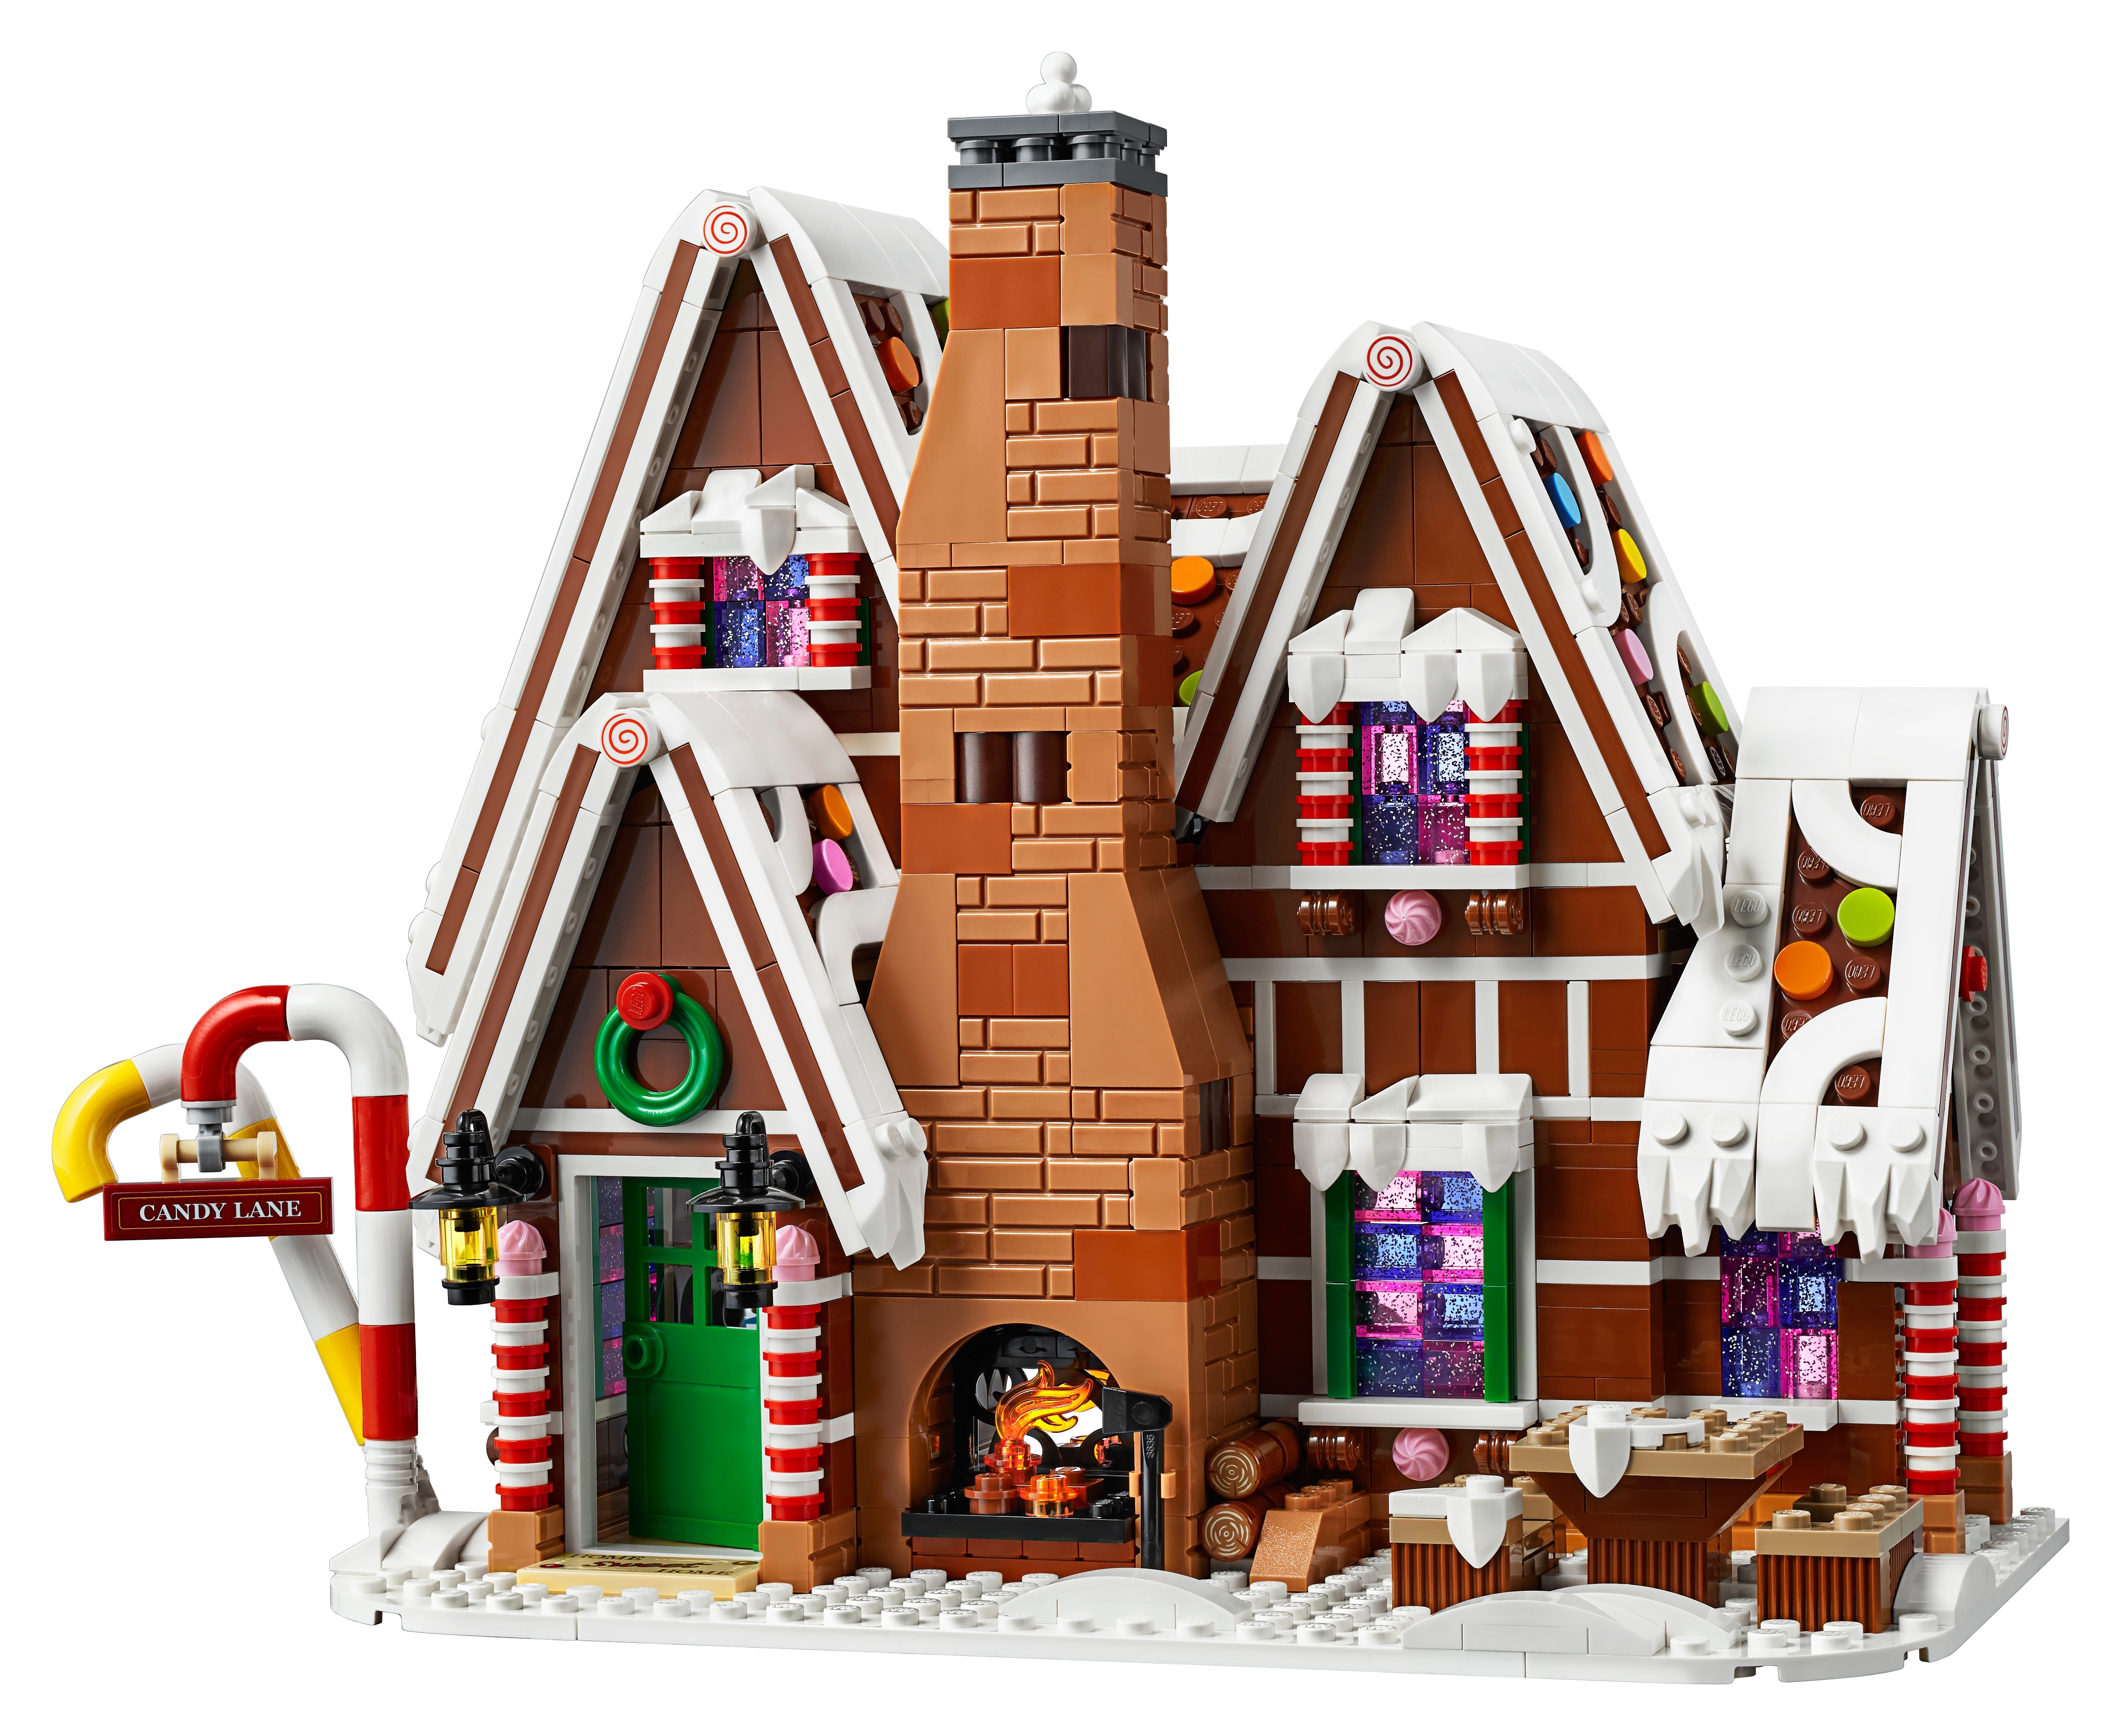 Gæsterne Persona Link Gingerbread House 10267 | Creator Expert | Buy online at the Official LEGO®  Shop US